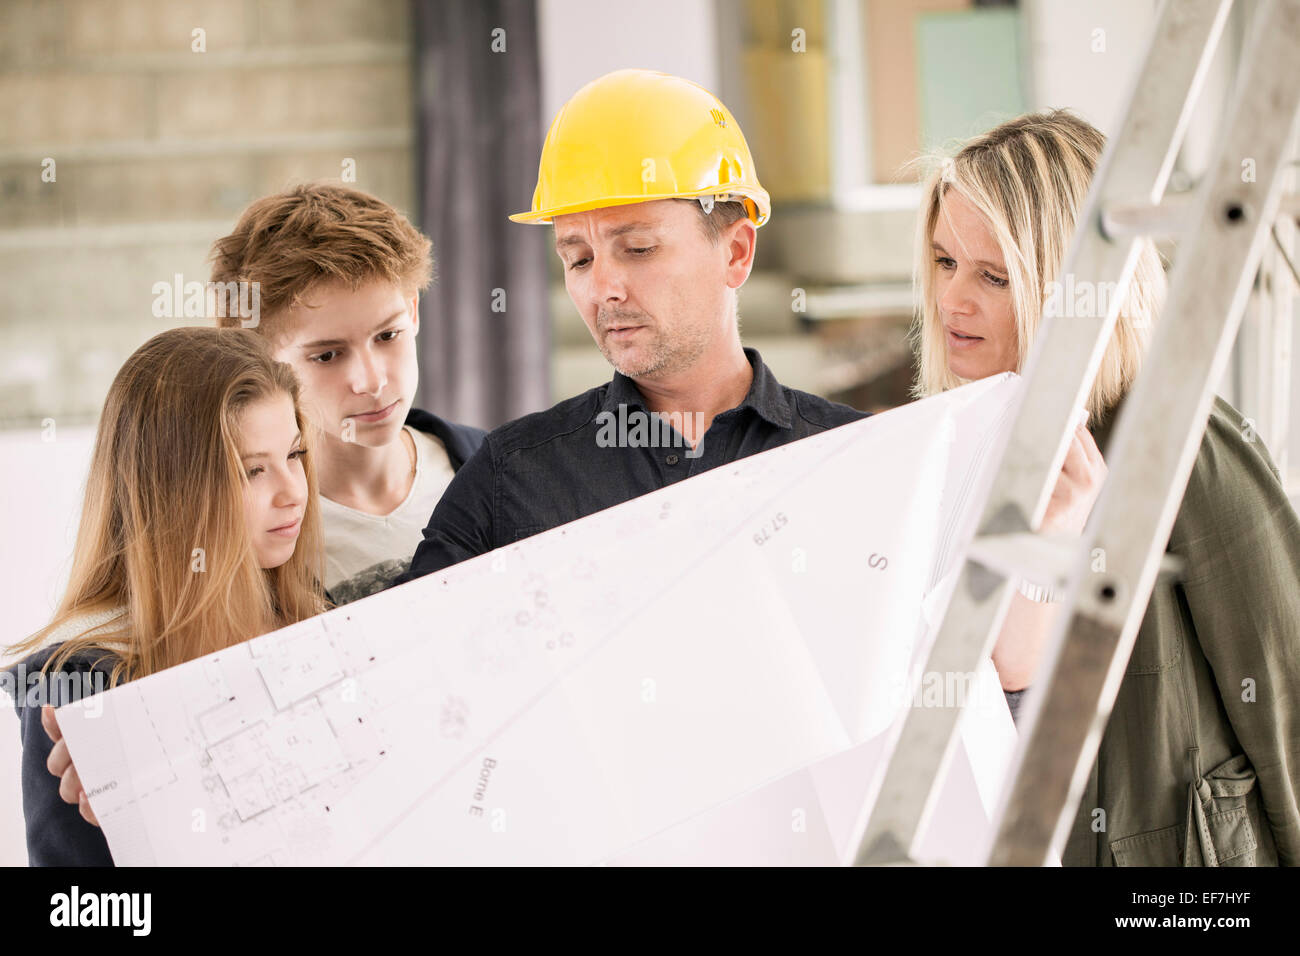 Engineer showing blueprint to family Stock Photo